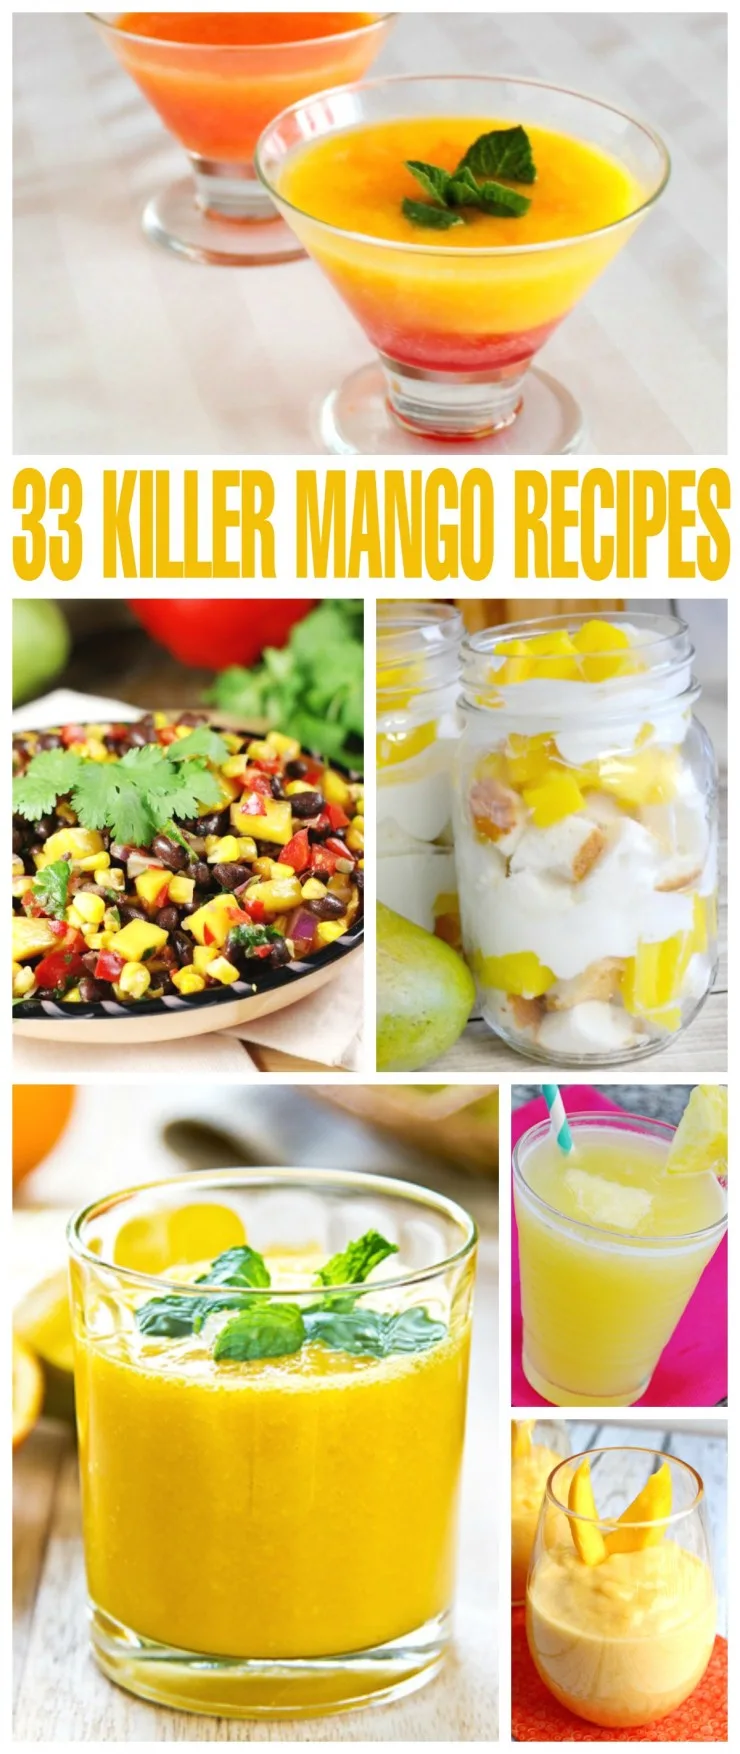 These 33 Mango Recipes full of juicy, sweet mangoes. These recipes are healthy and flavourful - mangoes are perfect in beverages, salads, main dishes and more!